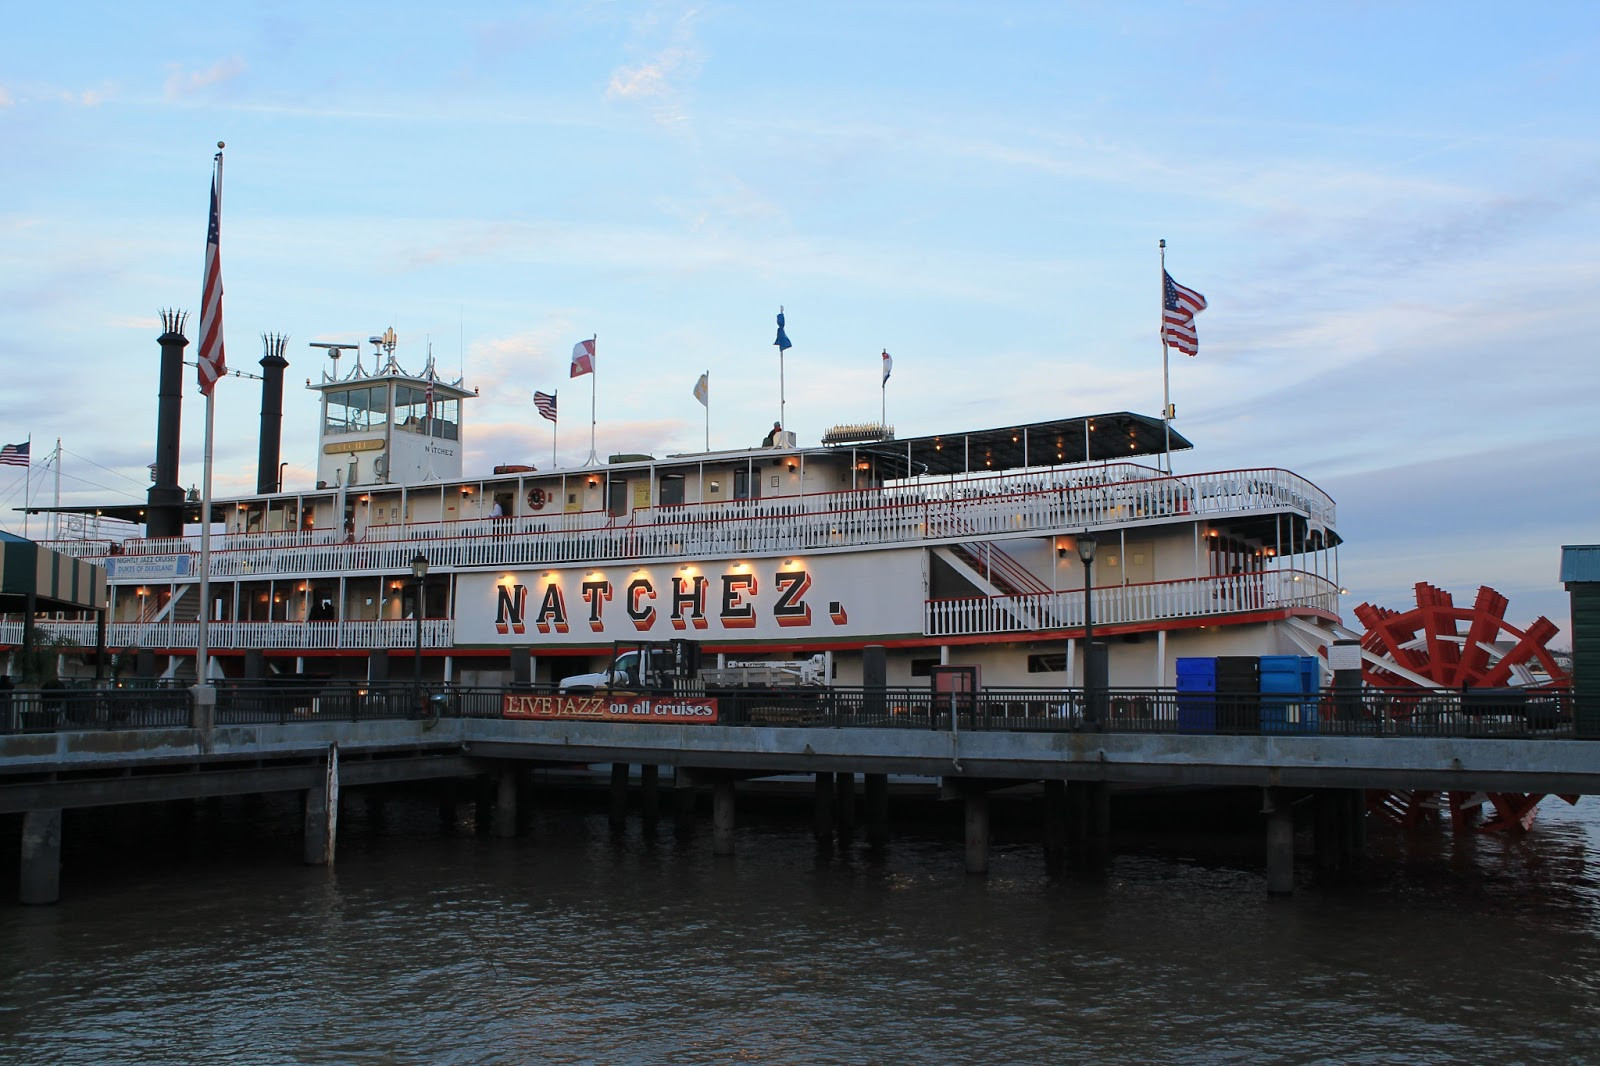 Dinner Cruise New Orleans
 New Orleans Steamboat Natchez a magical night on the